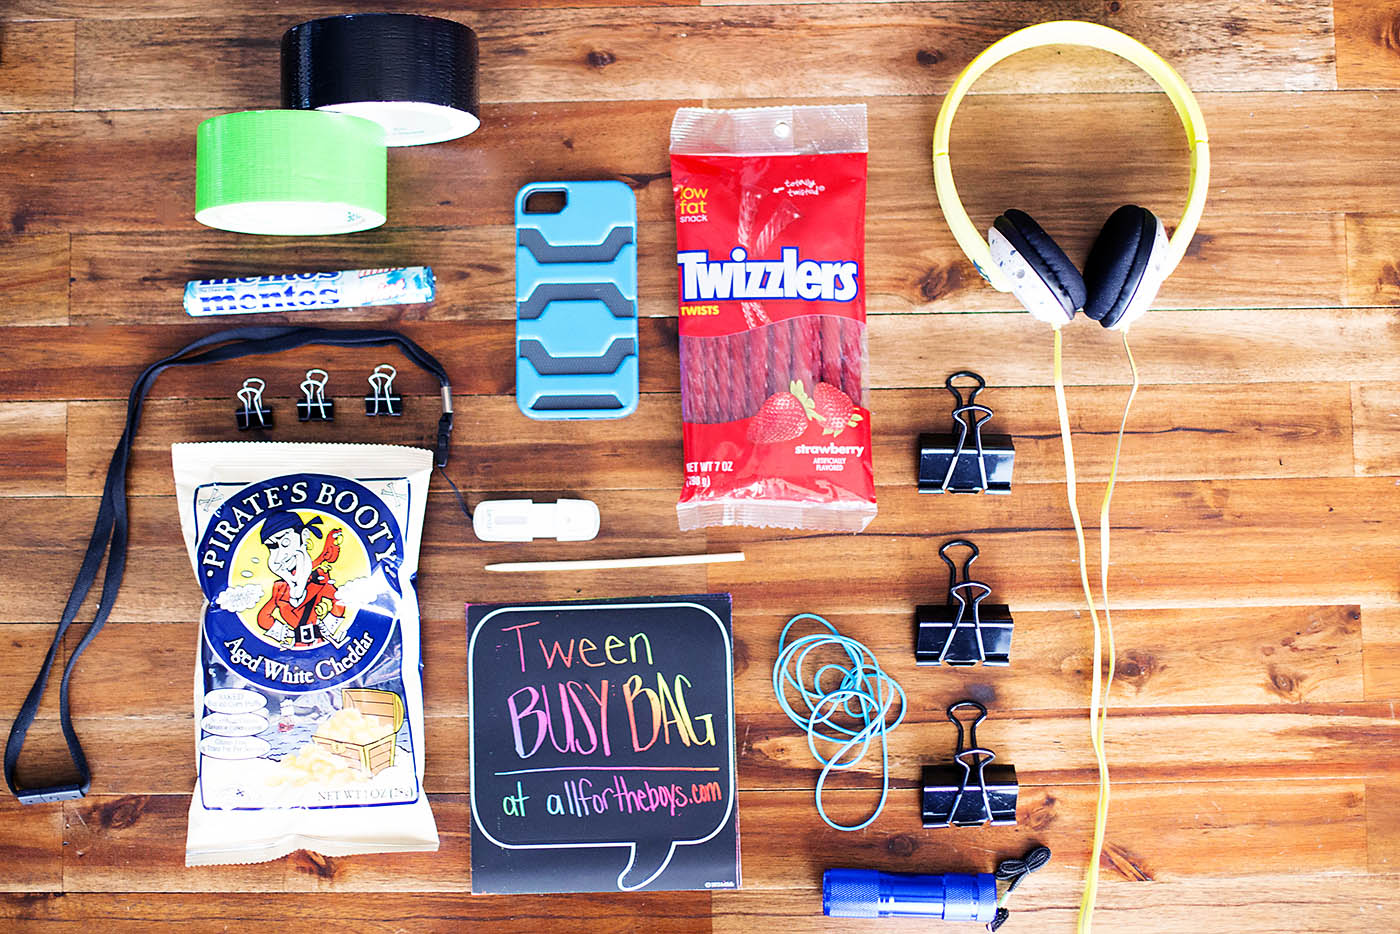 Tween busy bag - interesting ideas and things to pack to keep tweens busy!